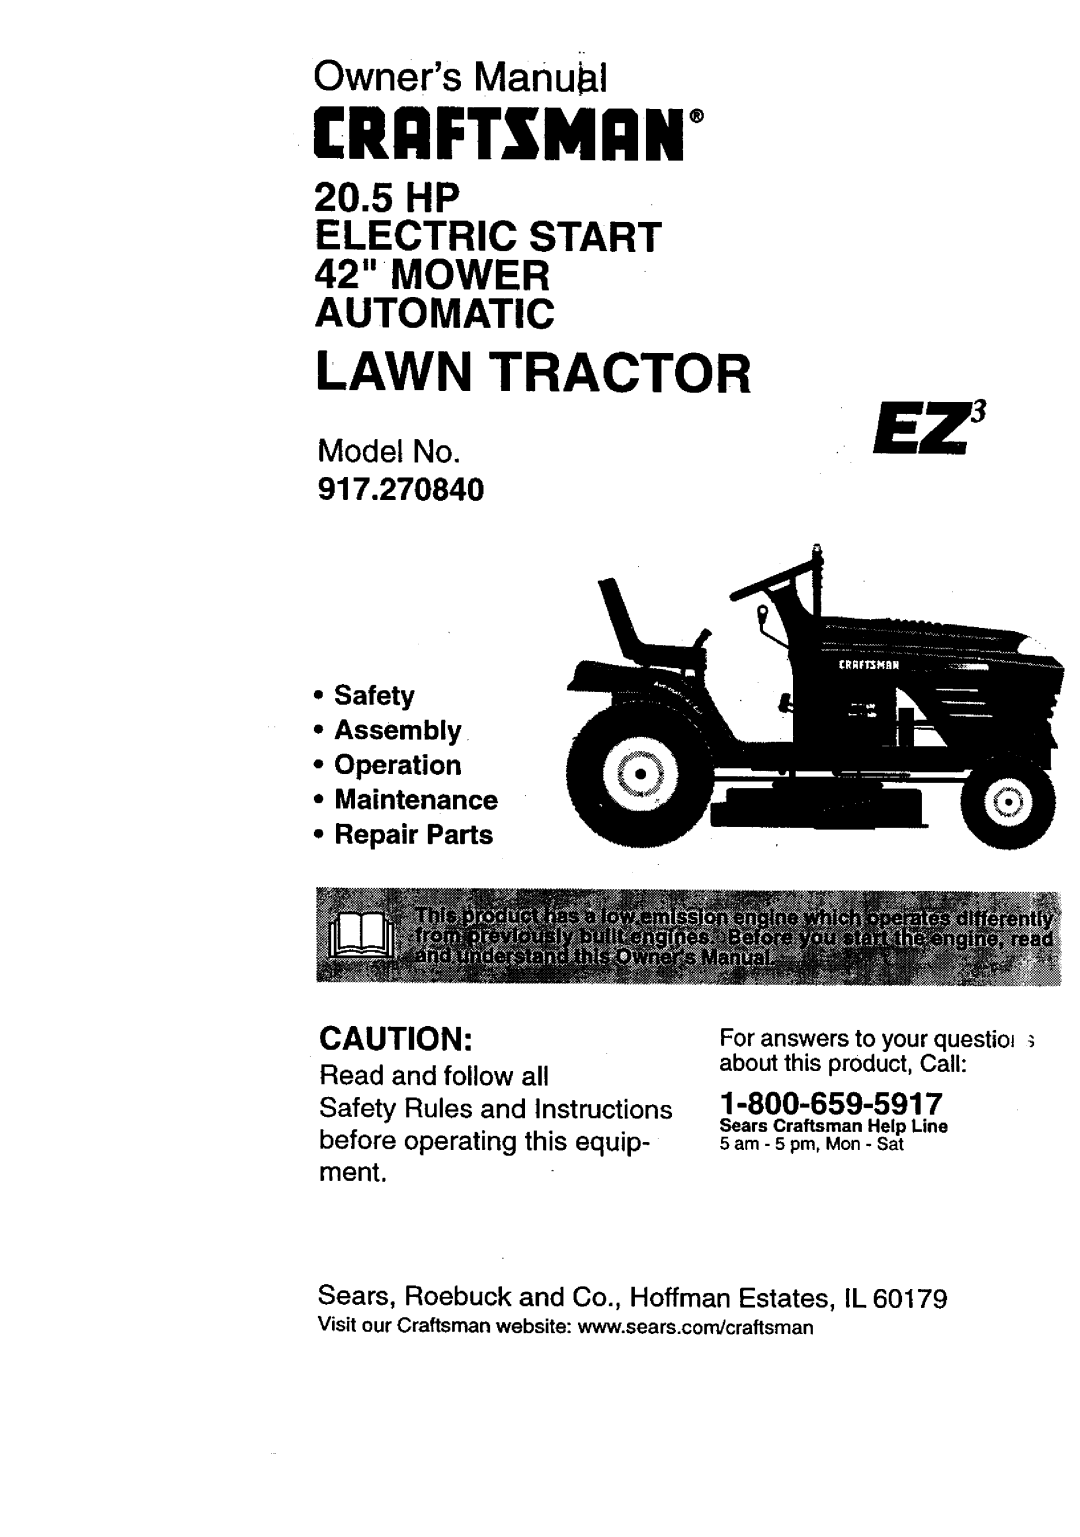 Craftsman 917.27084 manual Owners Manui_l, 20.5HP ELECTRIC START 42 MOWER AUTOMATIC, Model No, 1-800-659-5917, Craftsman+ 